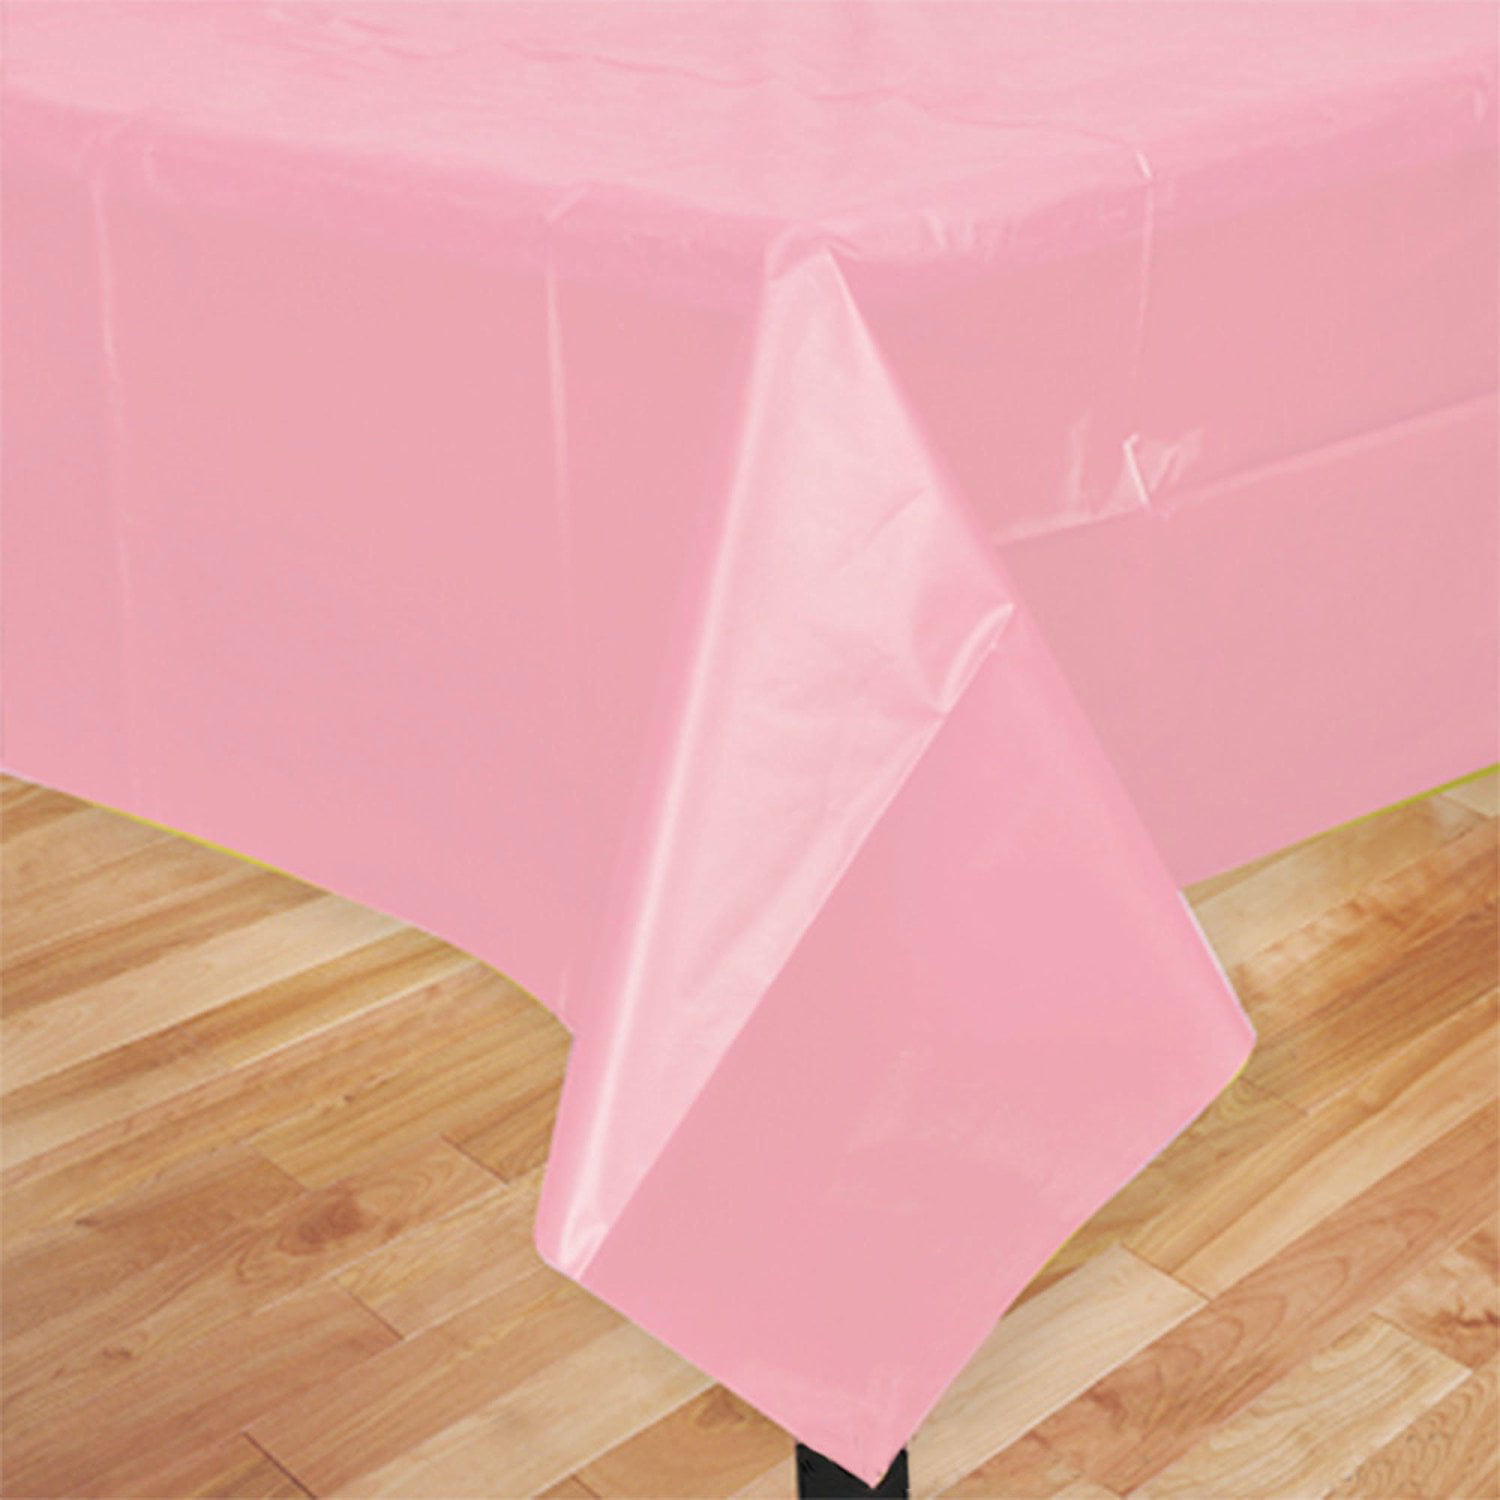 5 Metres Of Birthday Party Vinyl PVC Table Cloth Covering Fabric In Pink 